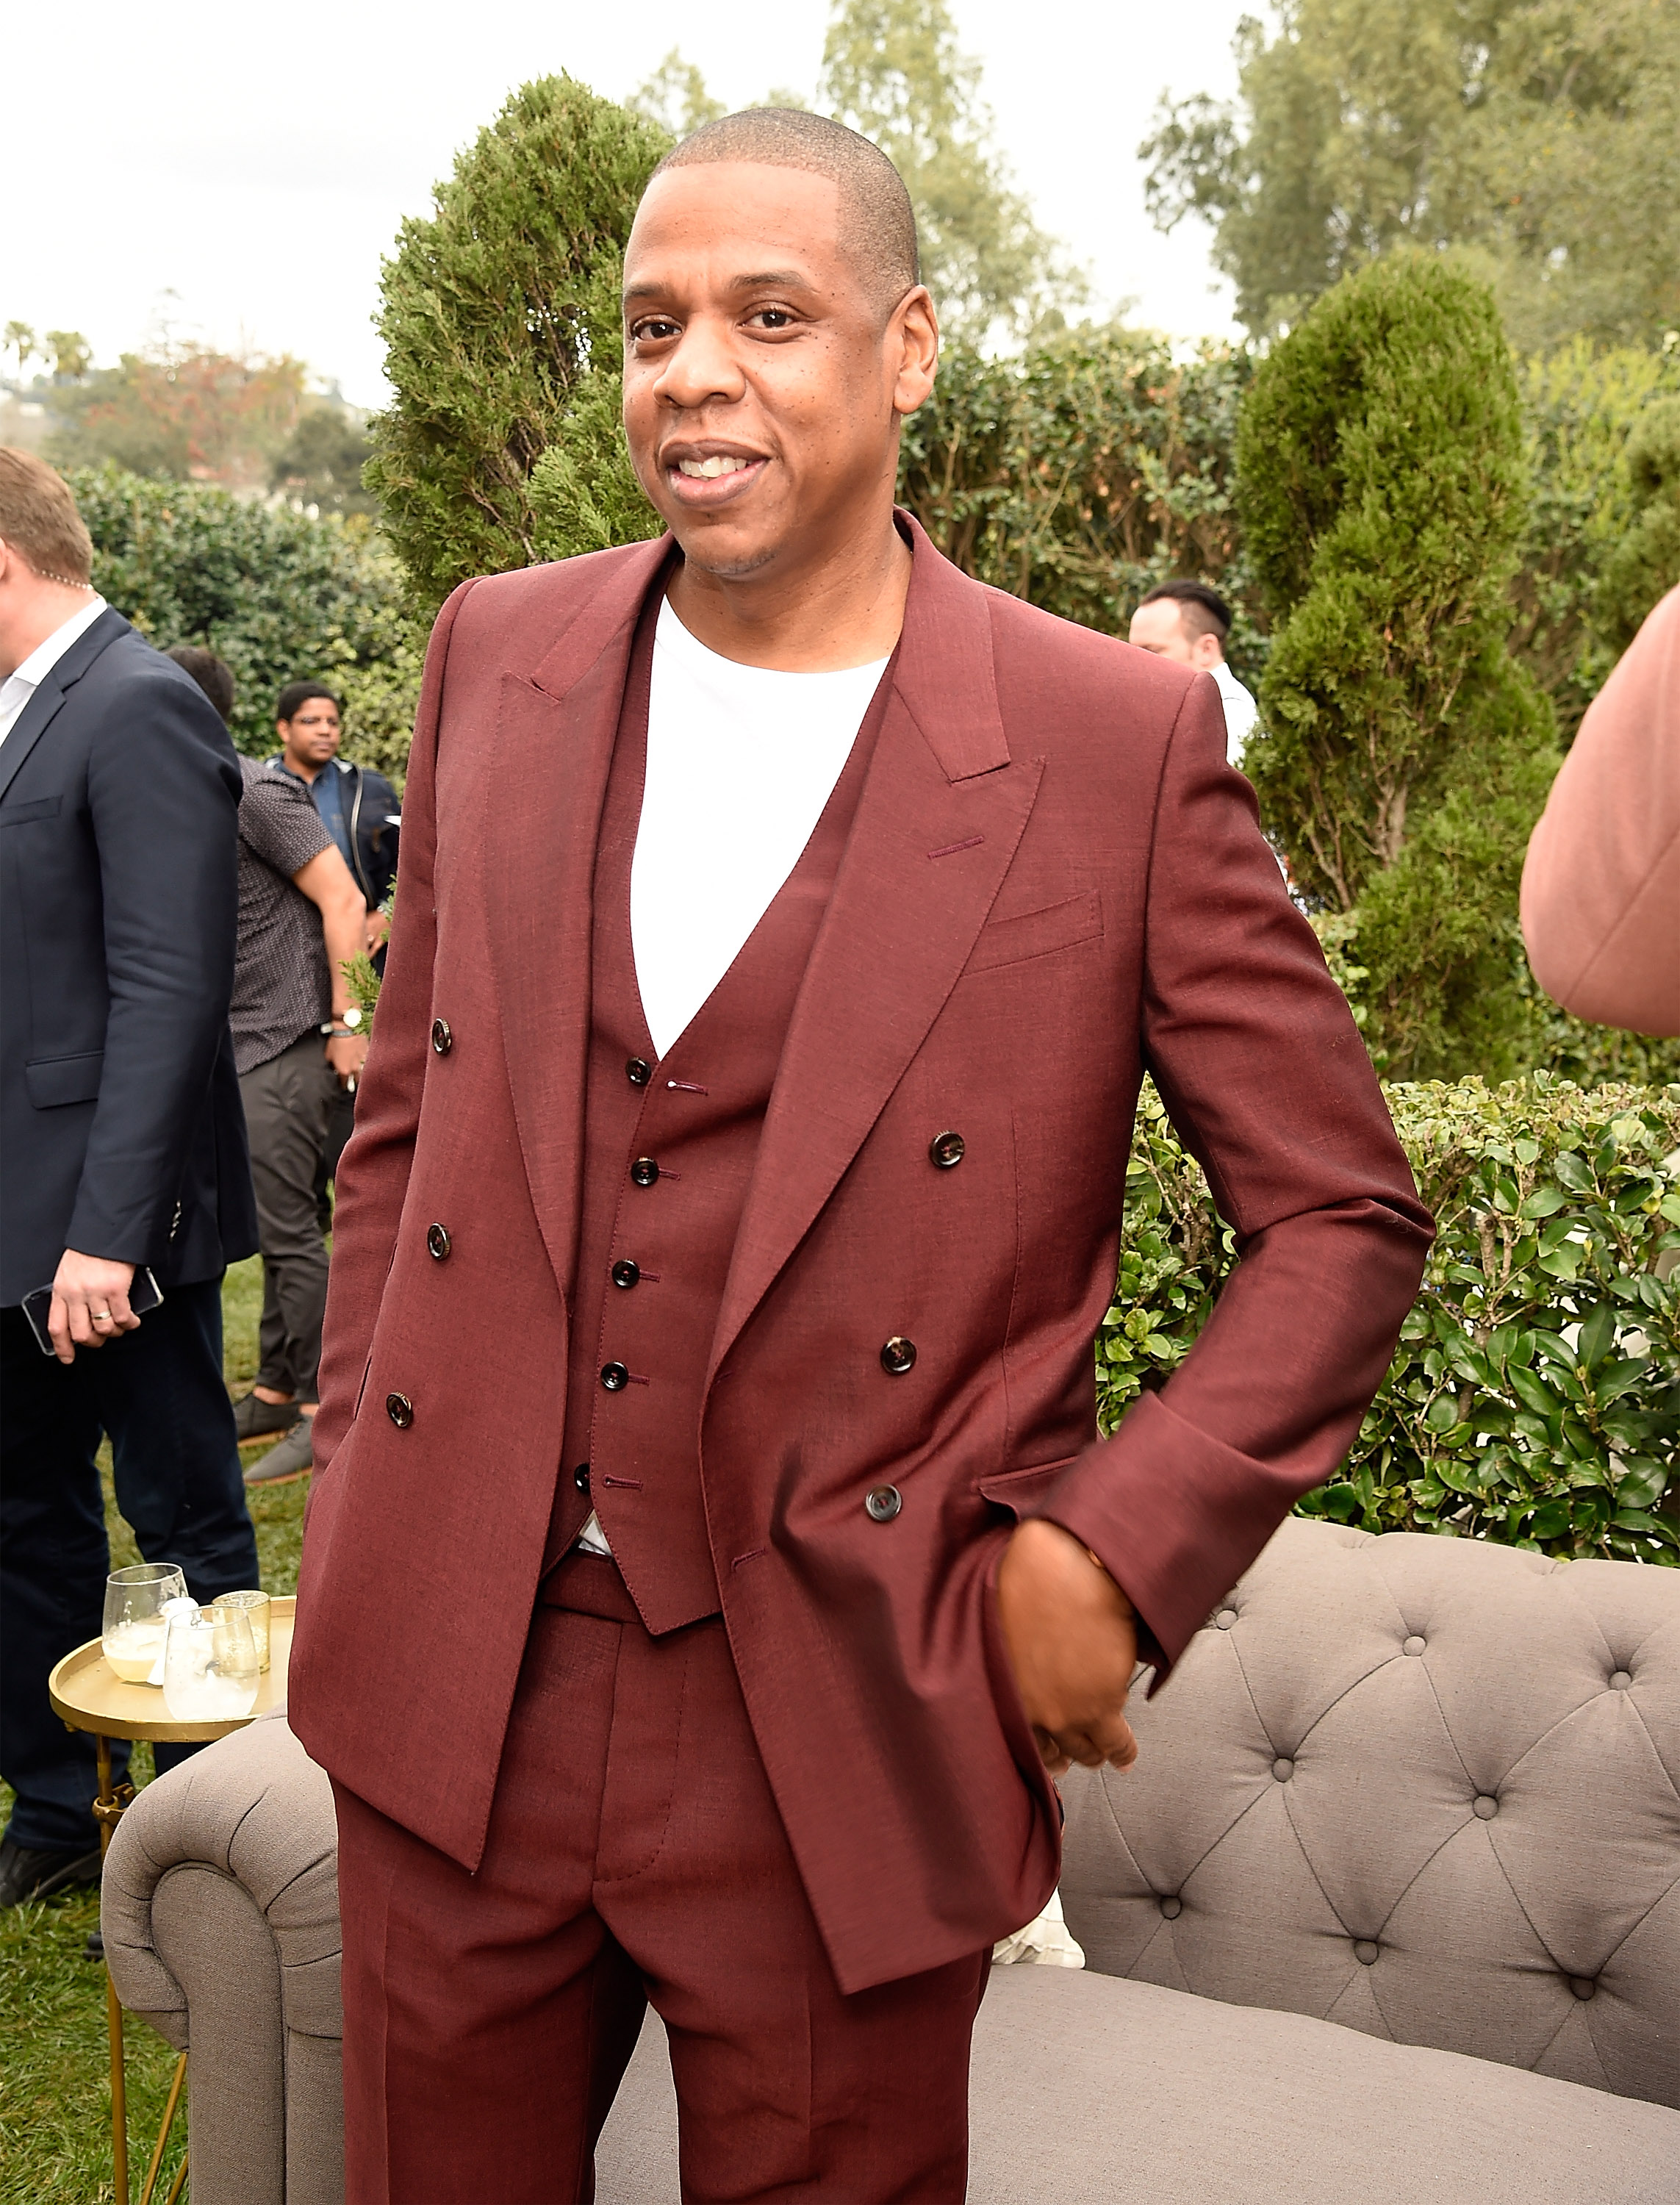 Jay Z attends the 2017 Roc Nation Pre-GRAMMY brunch at Owlwood Estate on February 11, 2017, in Los Angeles, California. | Source: Getty Images